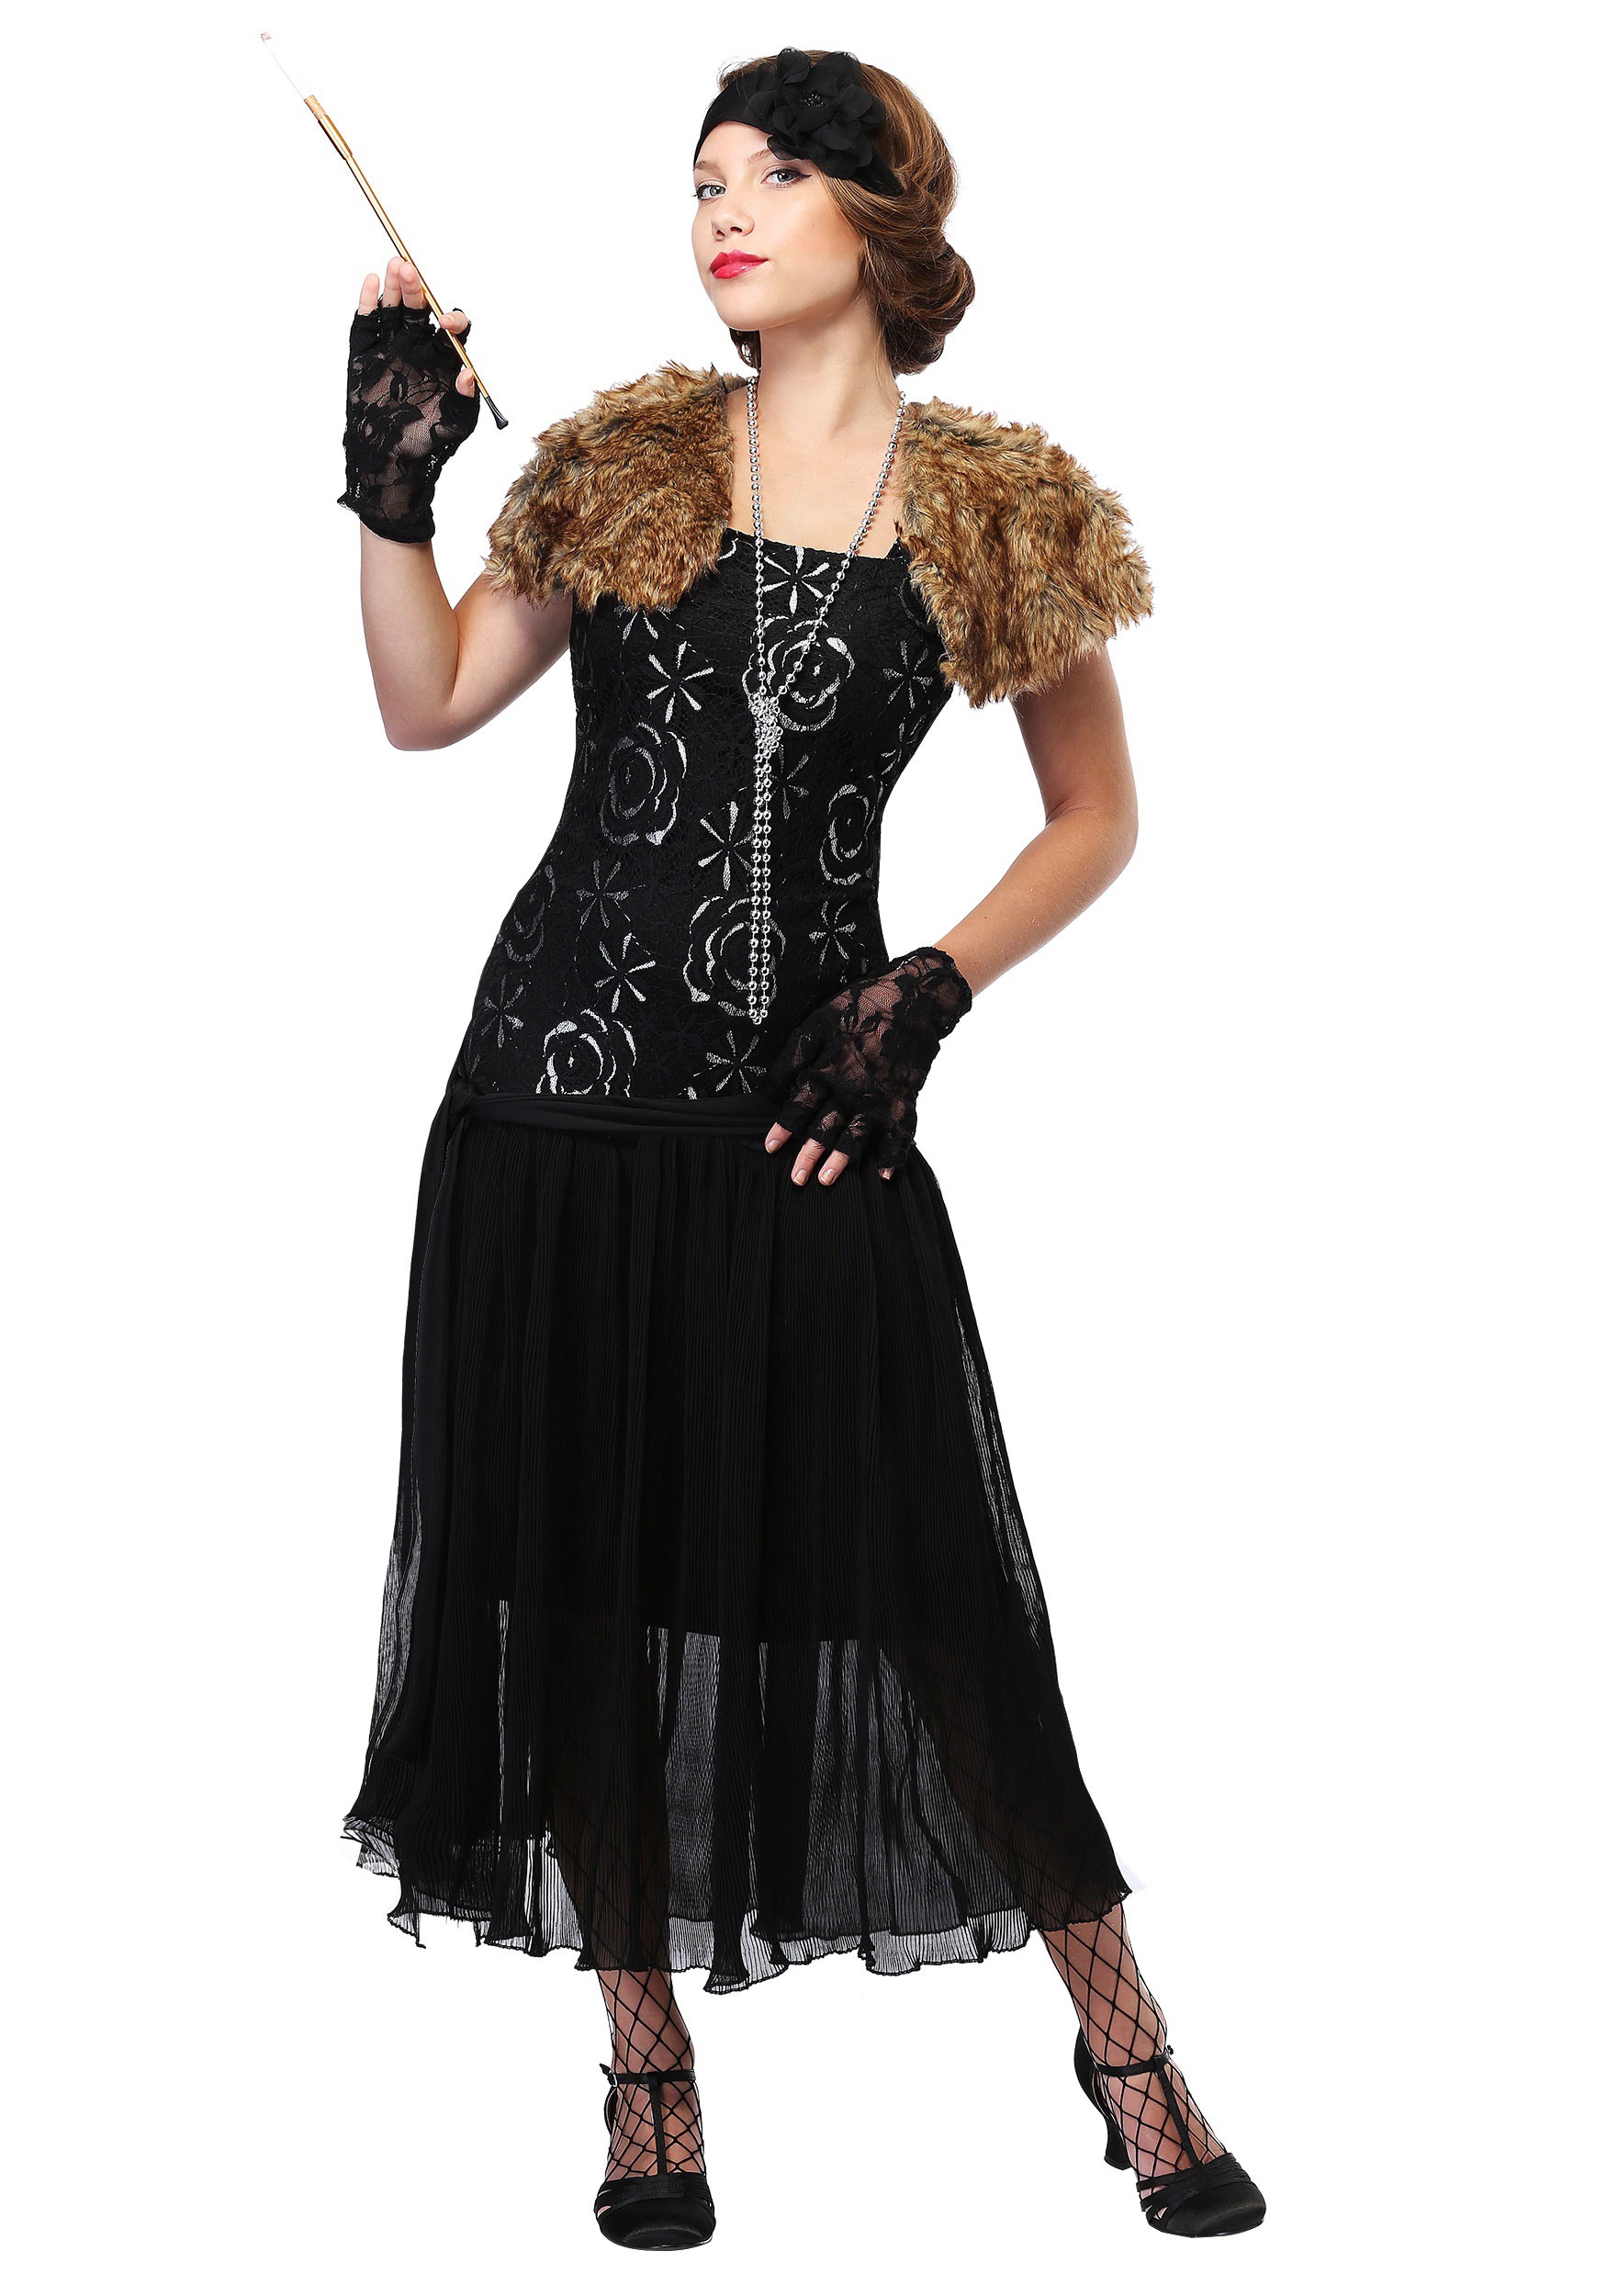 Charleston Flapper costume perfect for a 1920s Great Gatsby party.